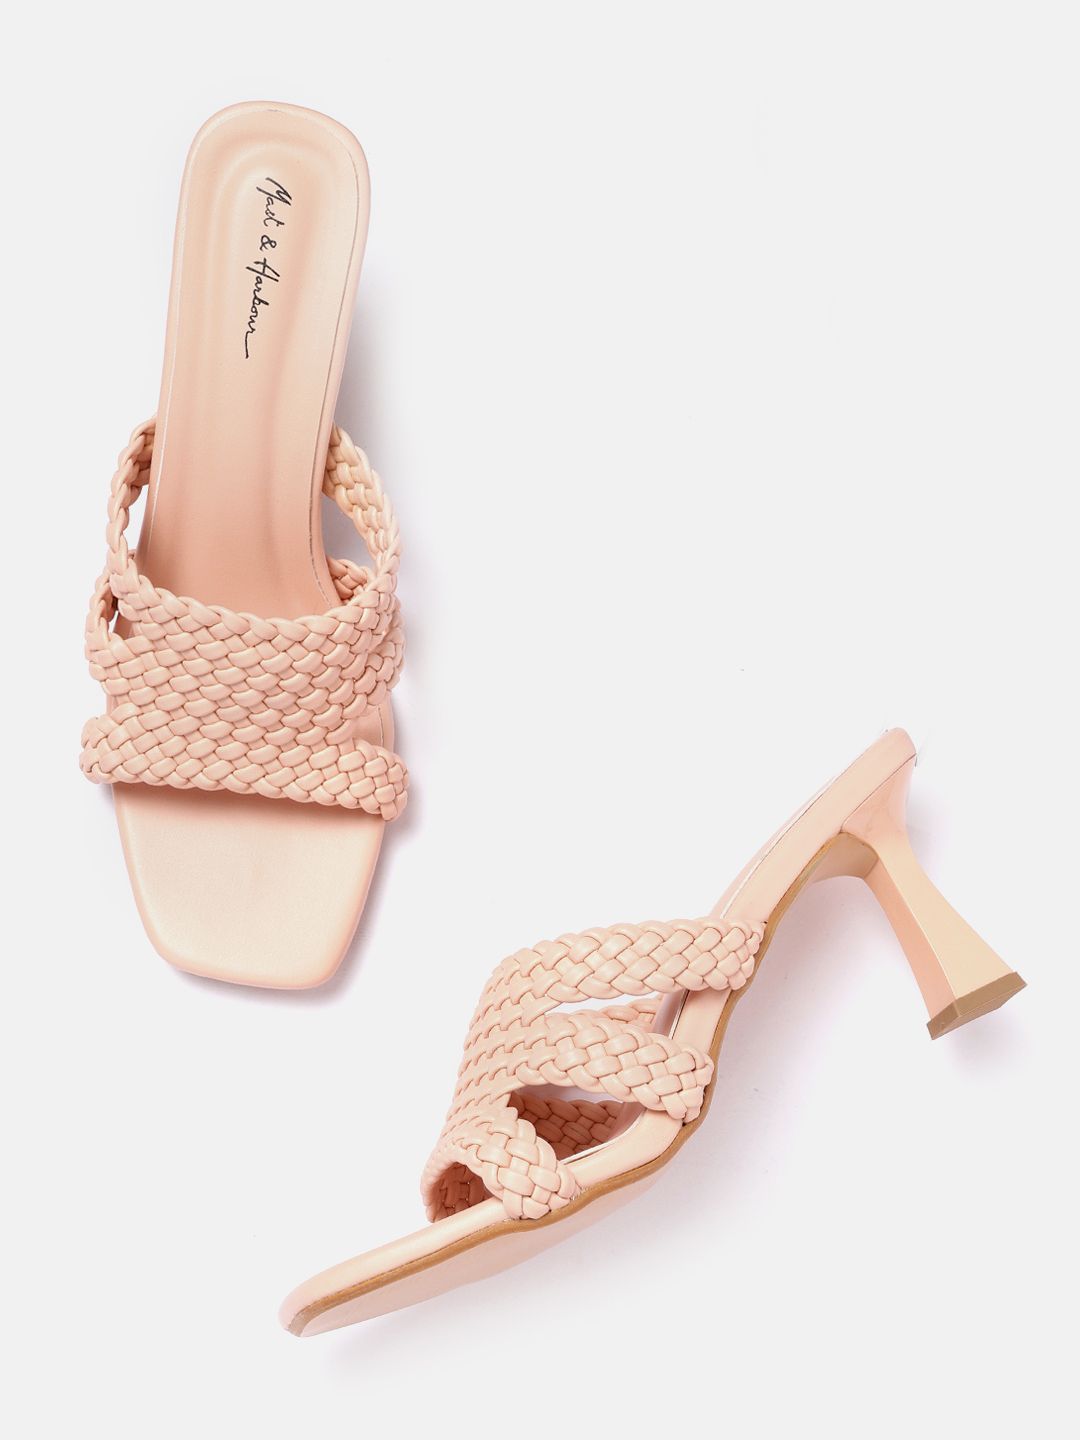 Mast & Harbour Peach-Coloured Textured High-Top Kitten Sandals Price in India